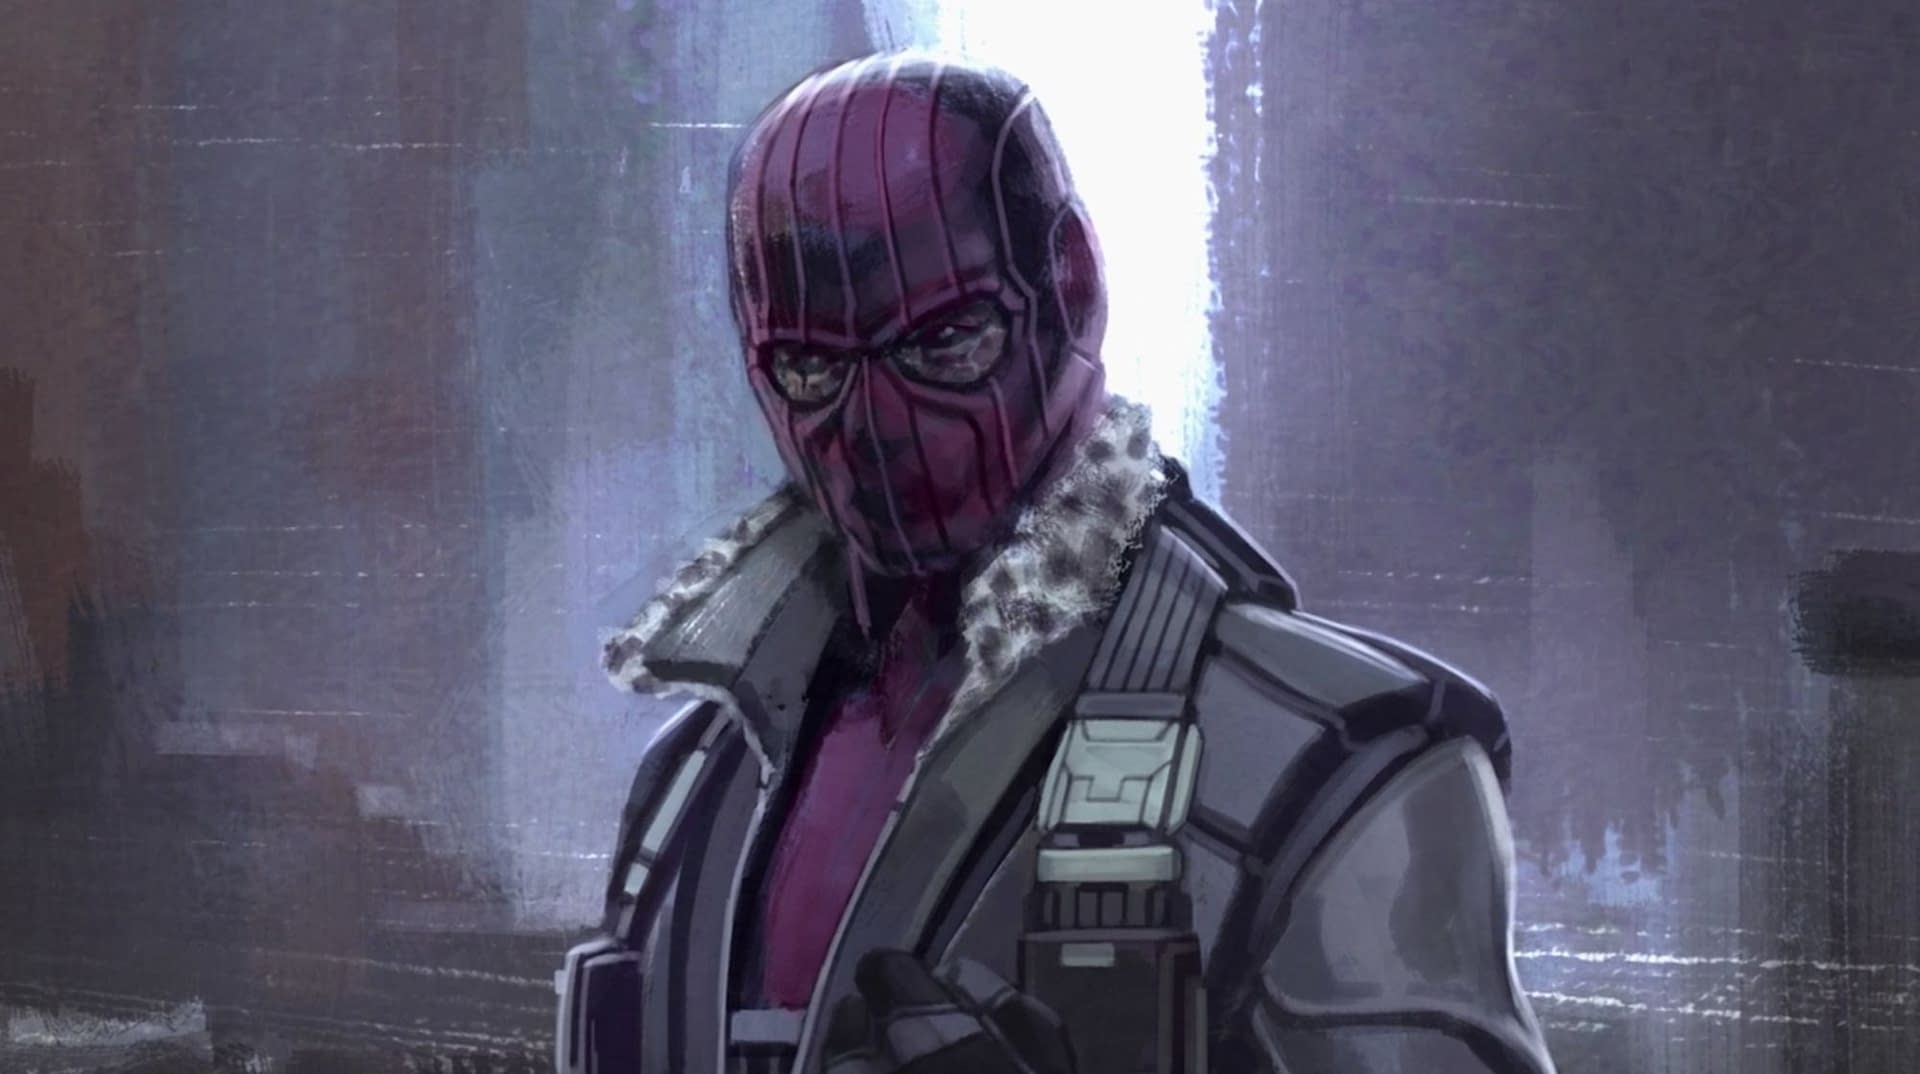 "The Falcon and The Winter Soldier": Disney+ Shares Character Concept Art [IMAGES]